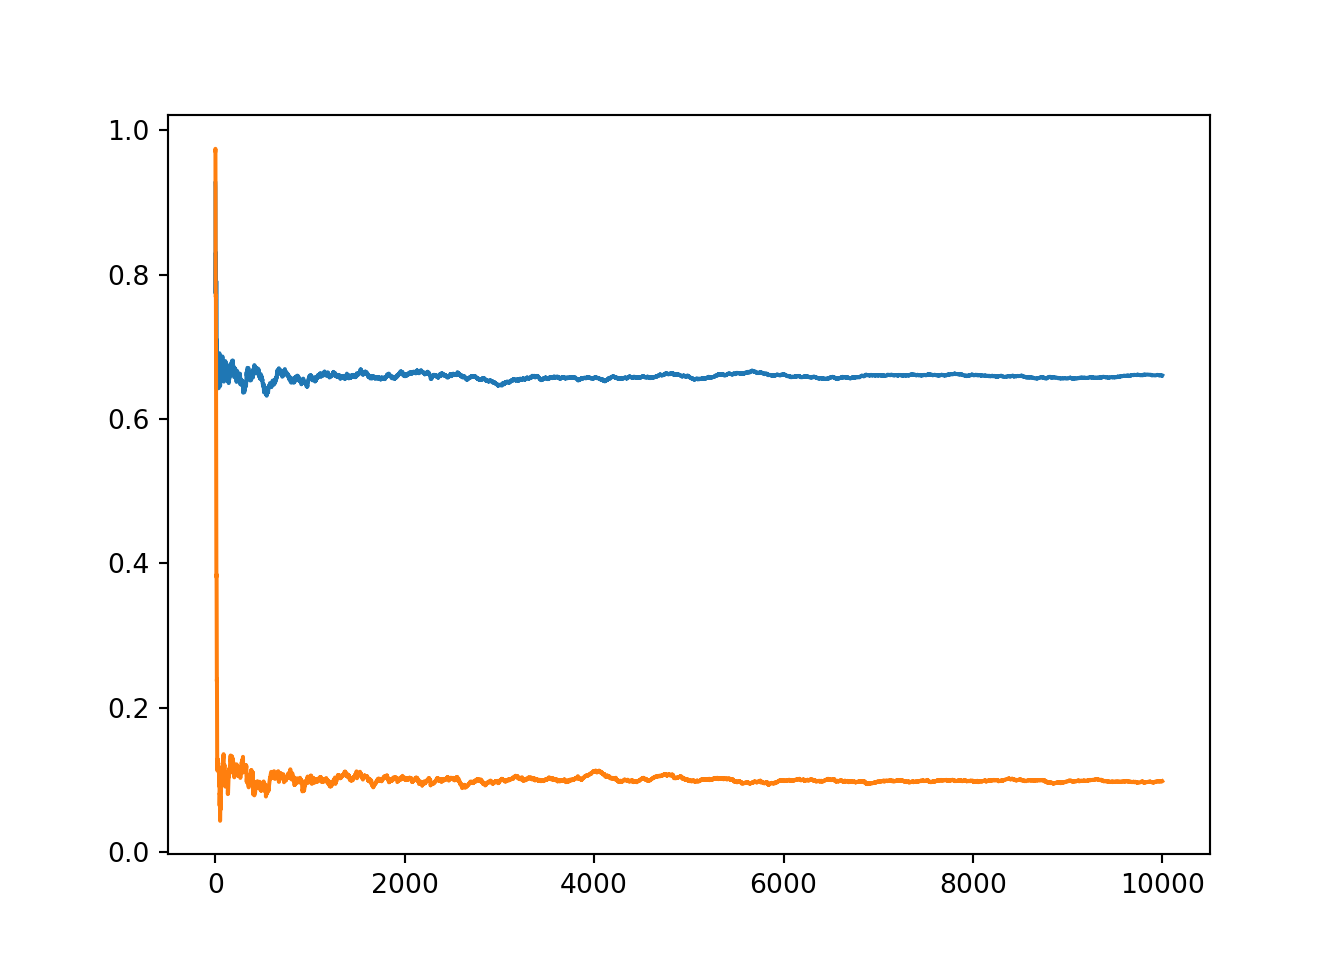 Convergence of the parameters of the variational approximation during stochastic optimisation with PyTorch.